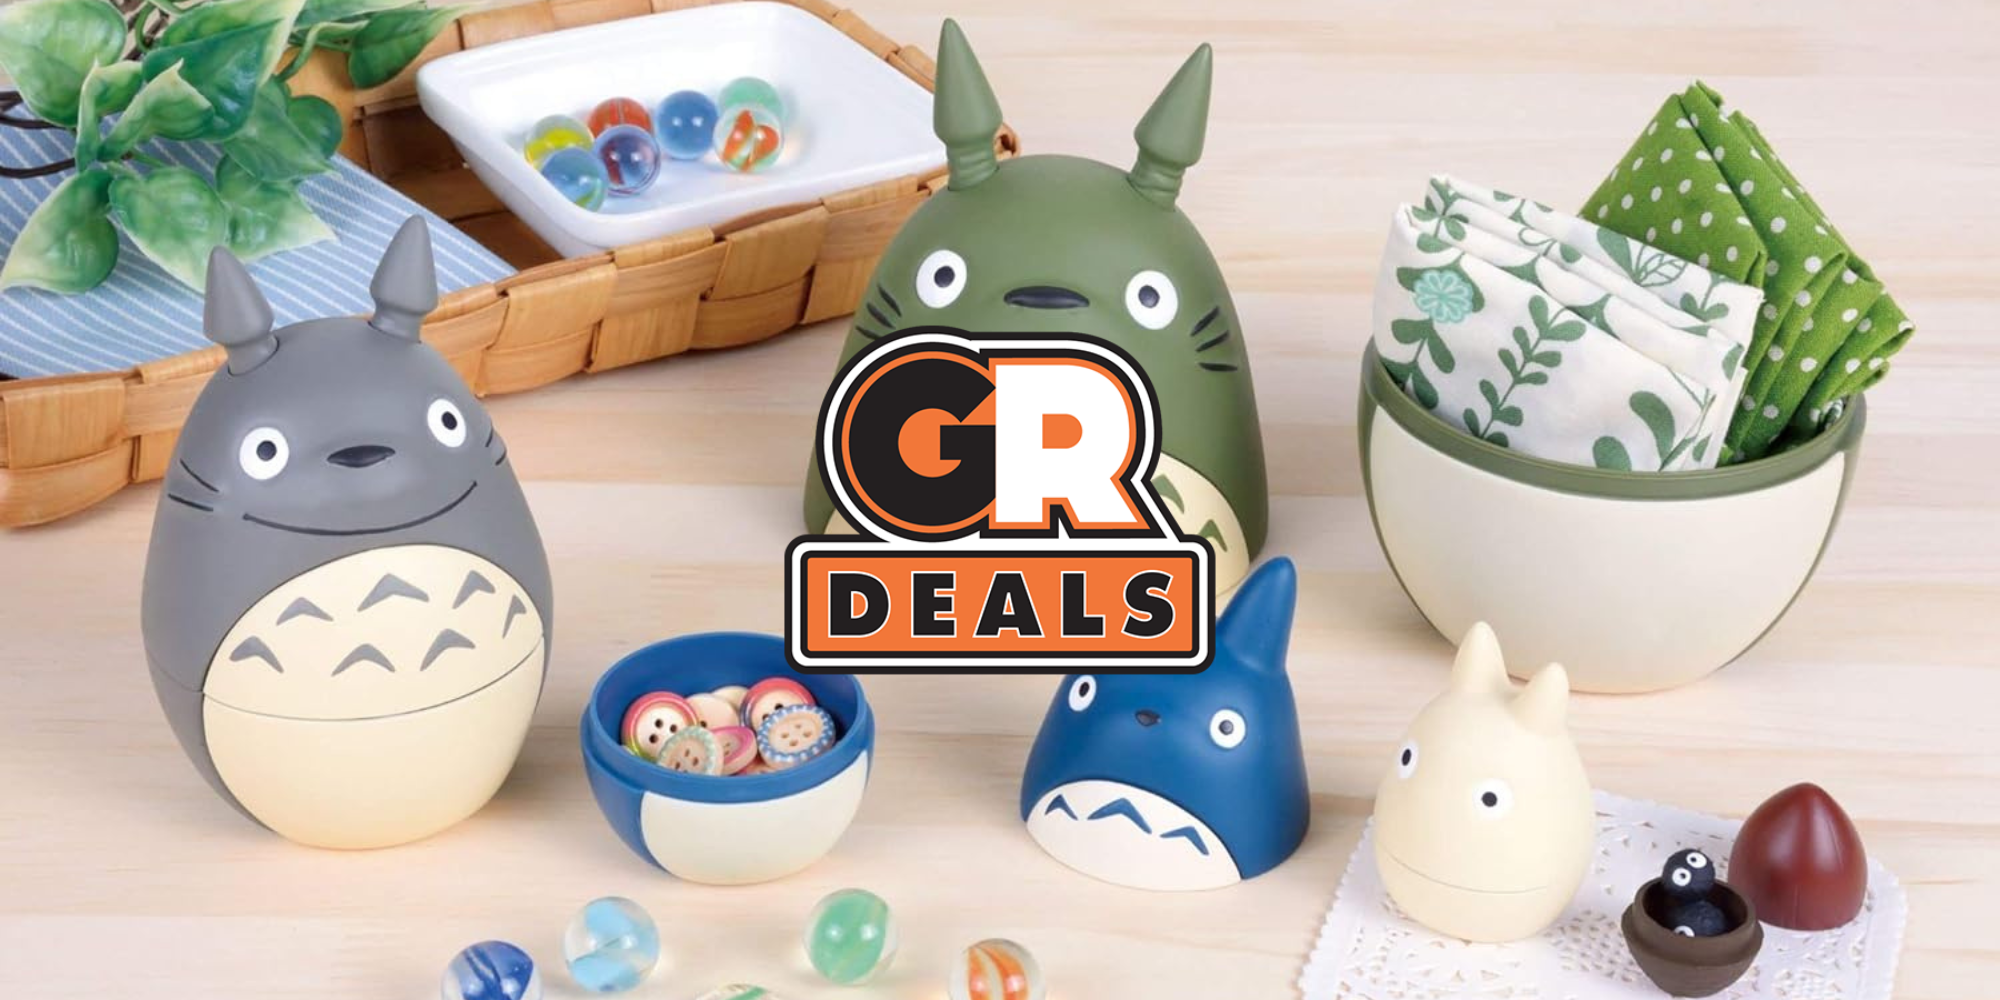 Totoro Nesting Dolls Feature Image for Deals